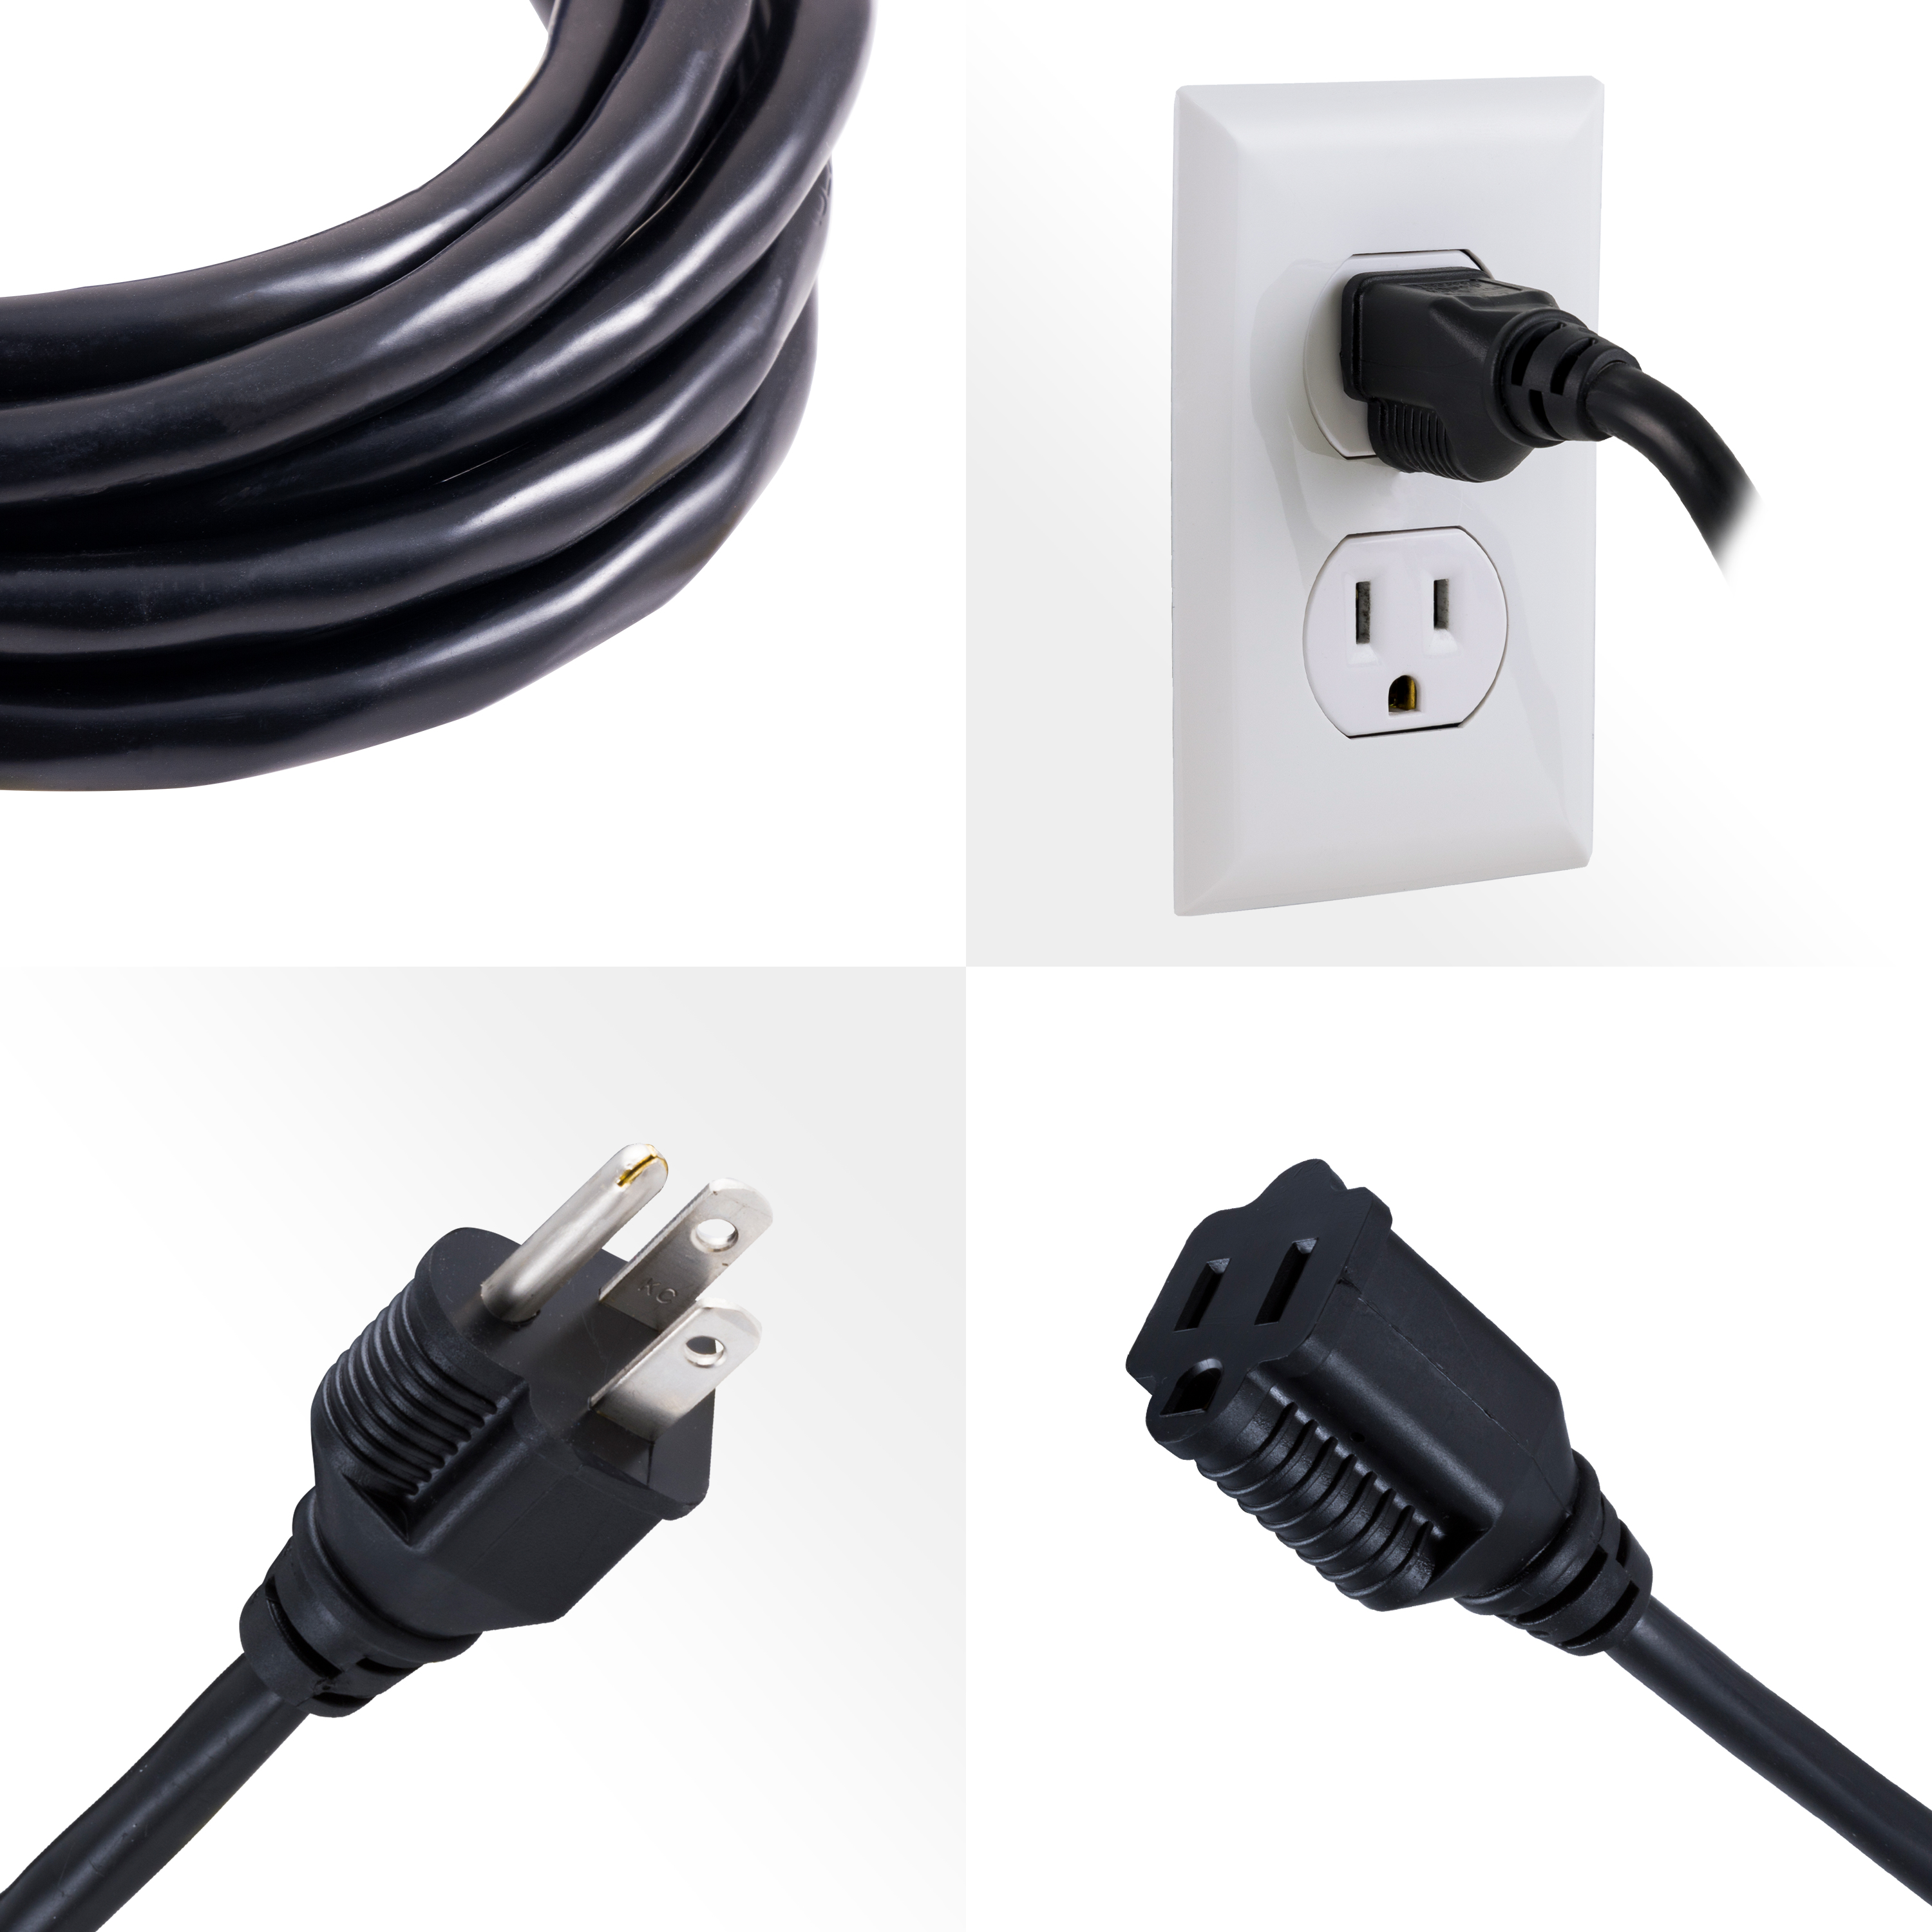 GE 15 ft Outdoor Extension Cord, 1 Outlet, Black, 36824 - image 2 of 7